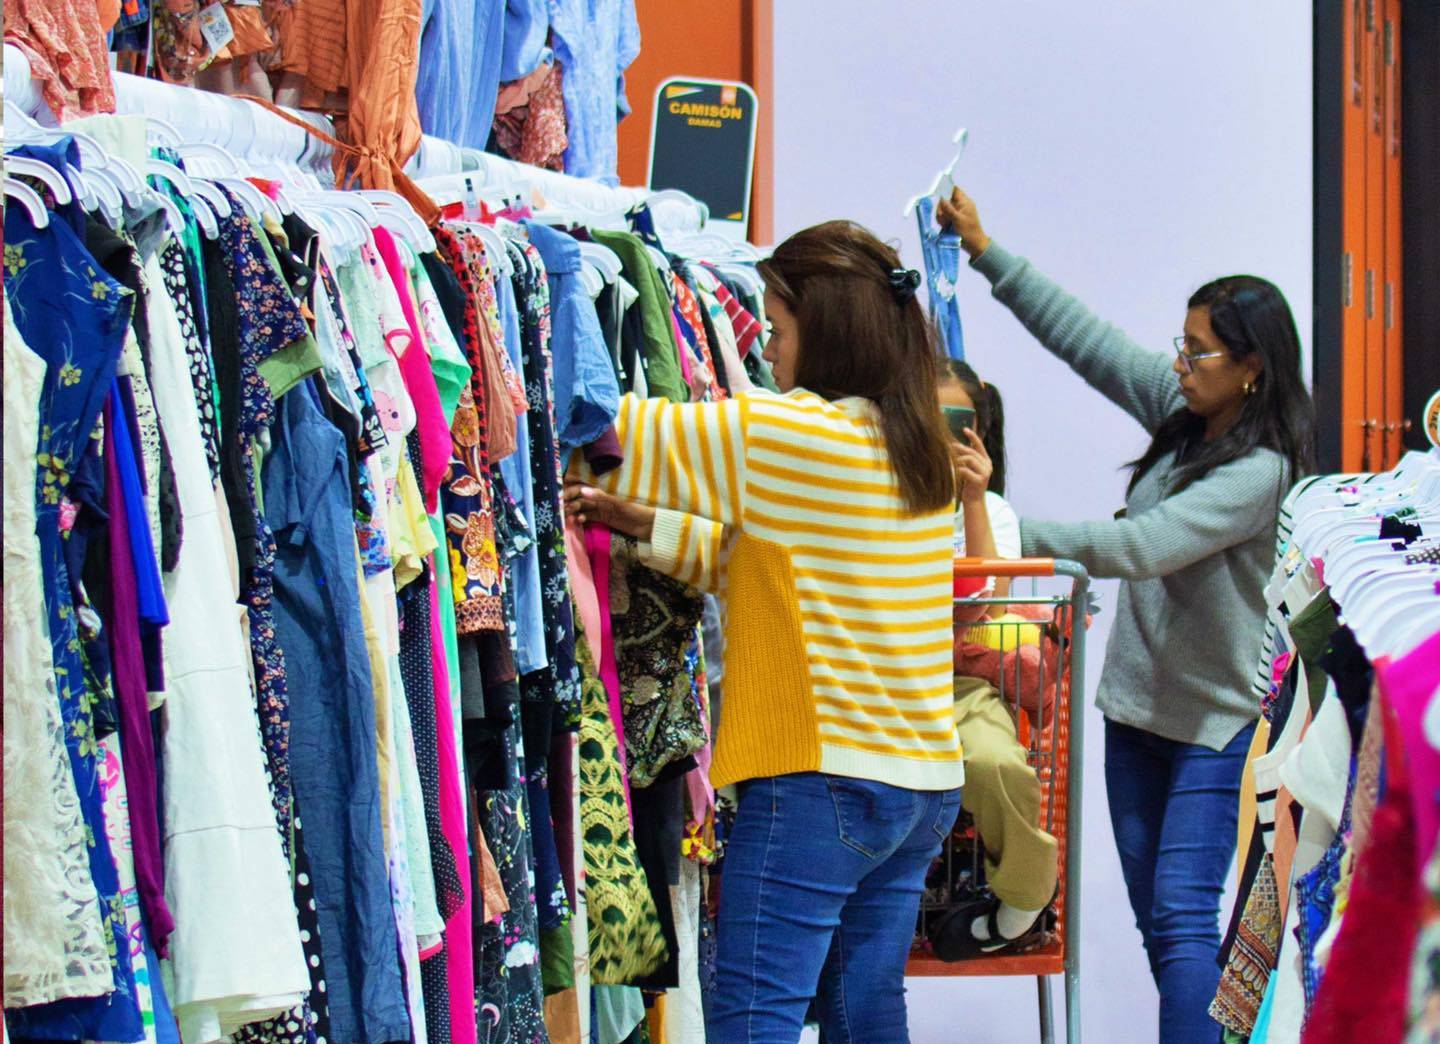 Guatemalan company Megapaca has changed the way people buy secondhand clothing.dfd